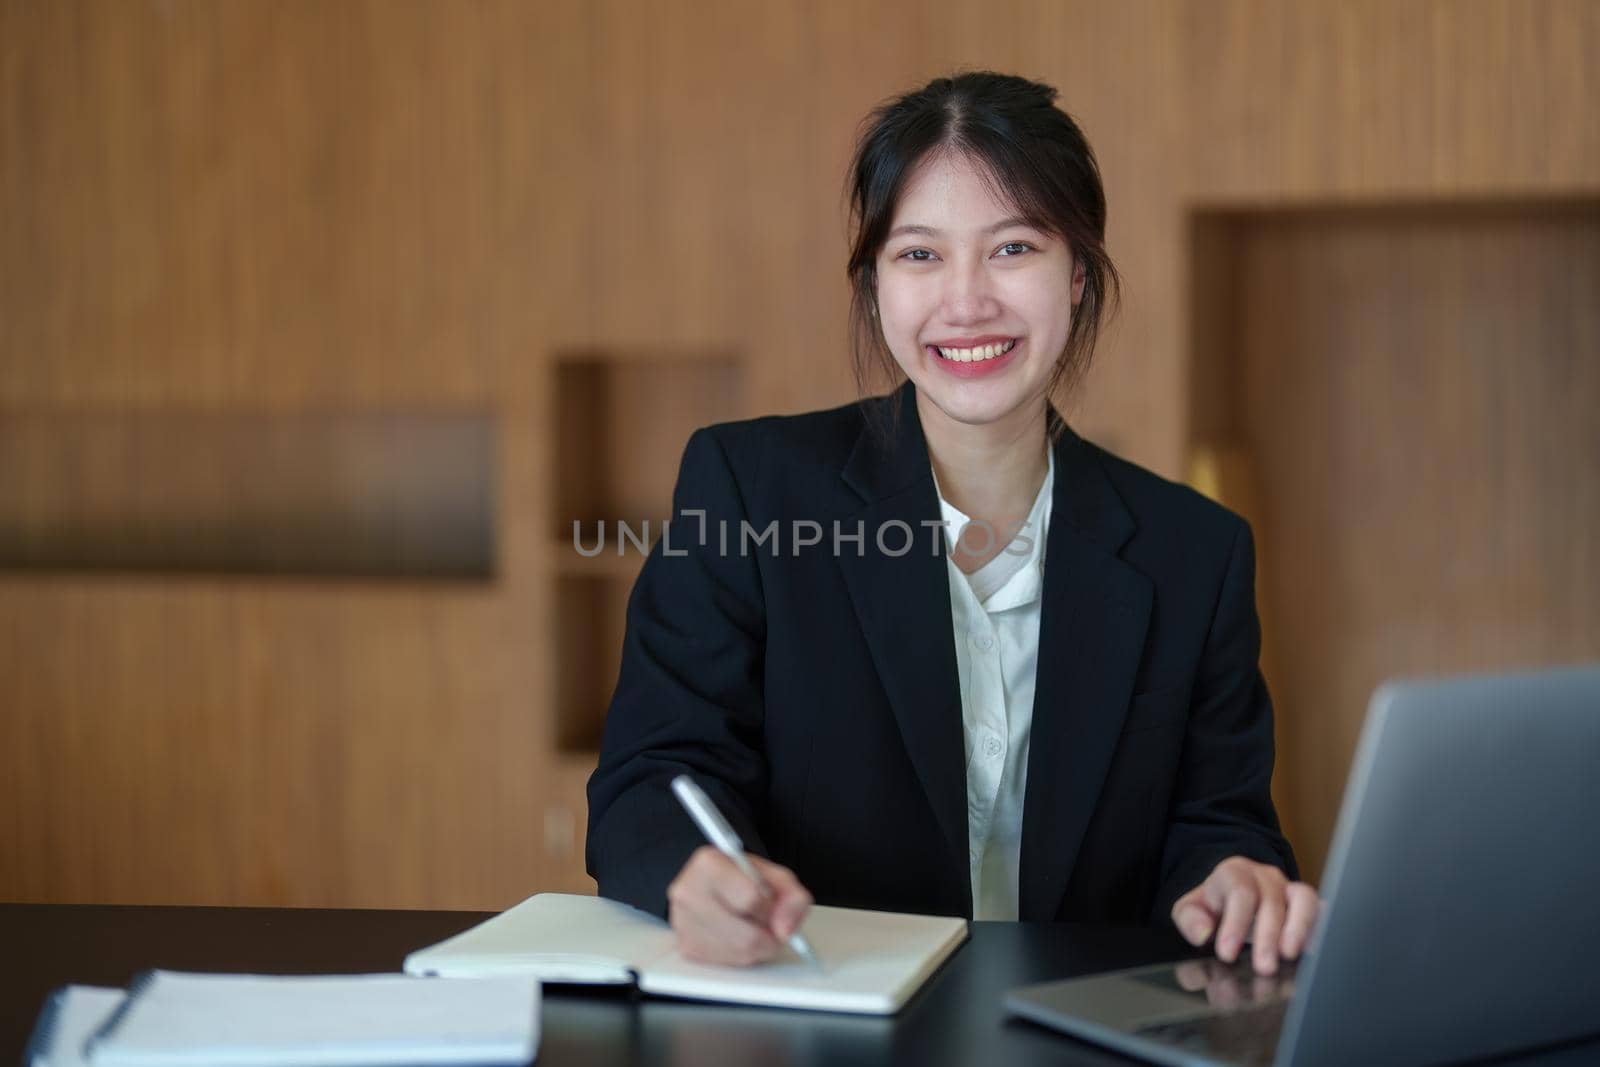 Portrait of an Asian businesswoman working with a happy smile in the office.